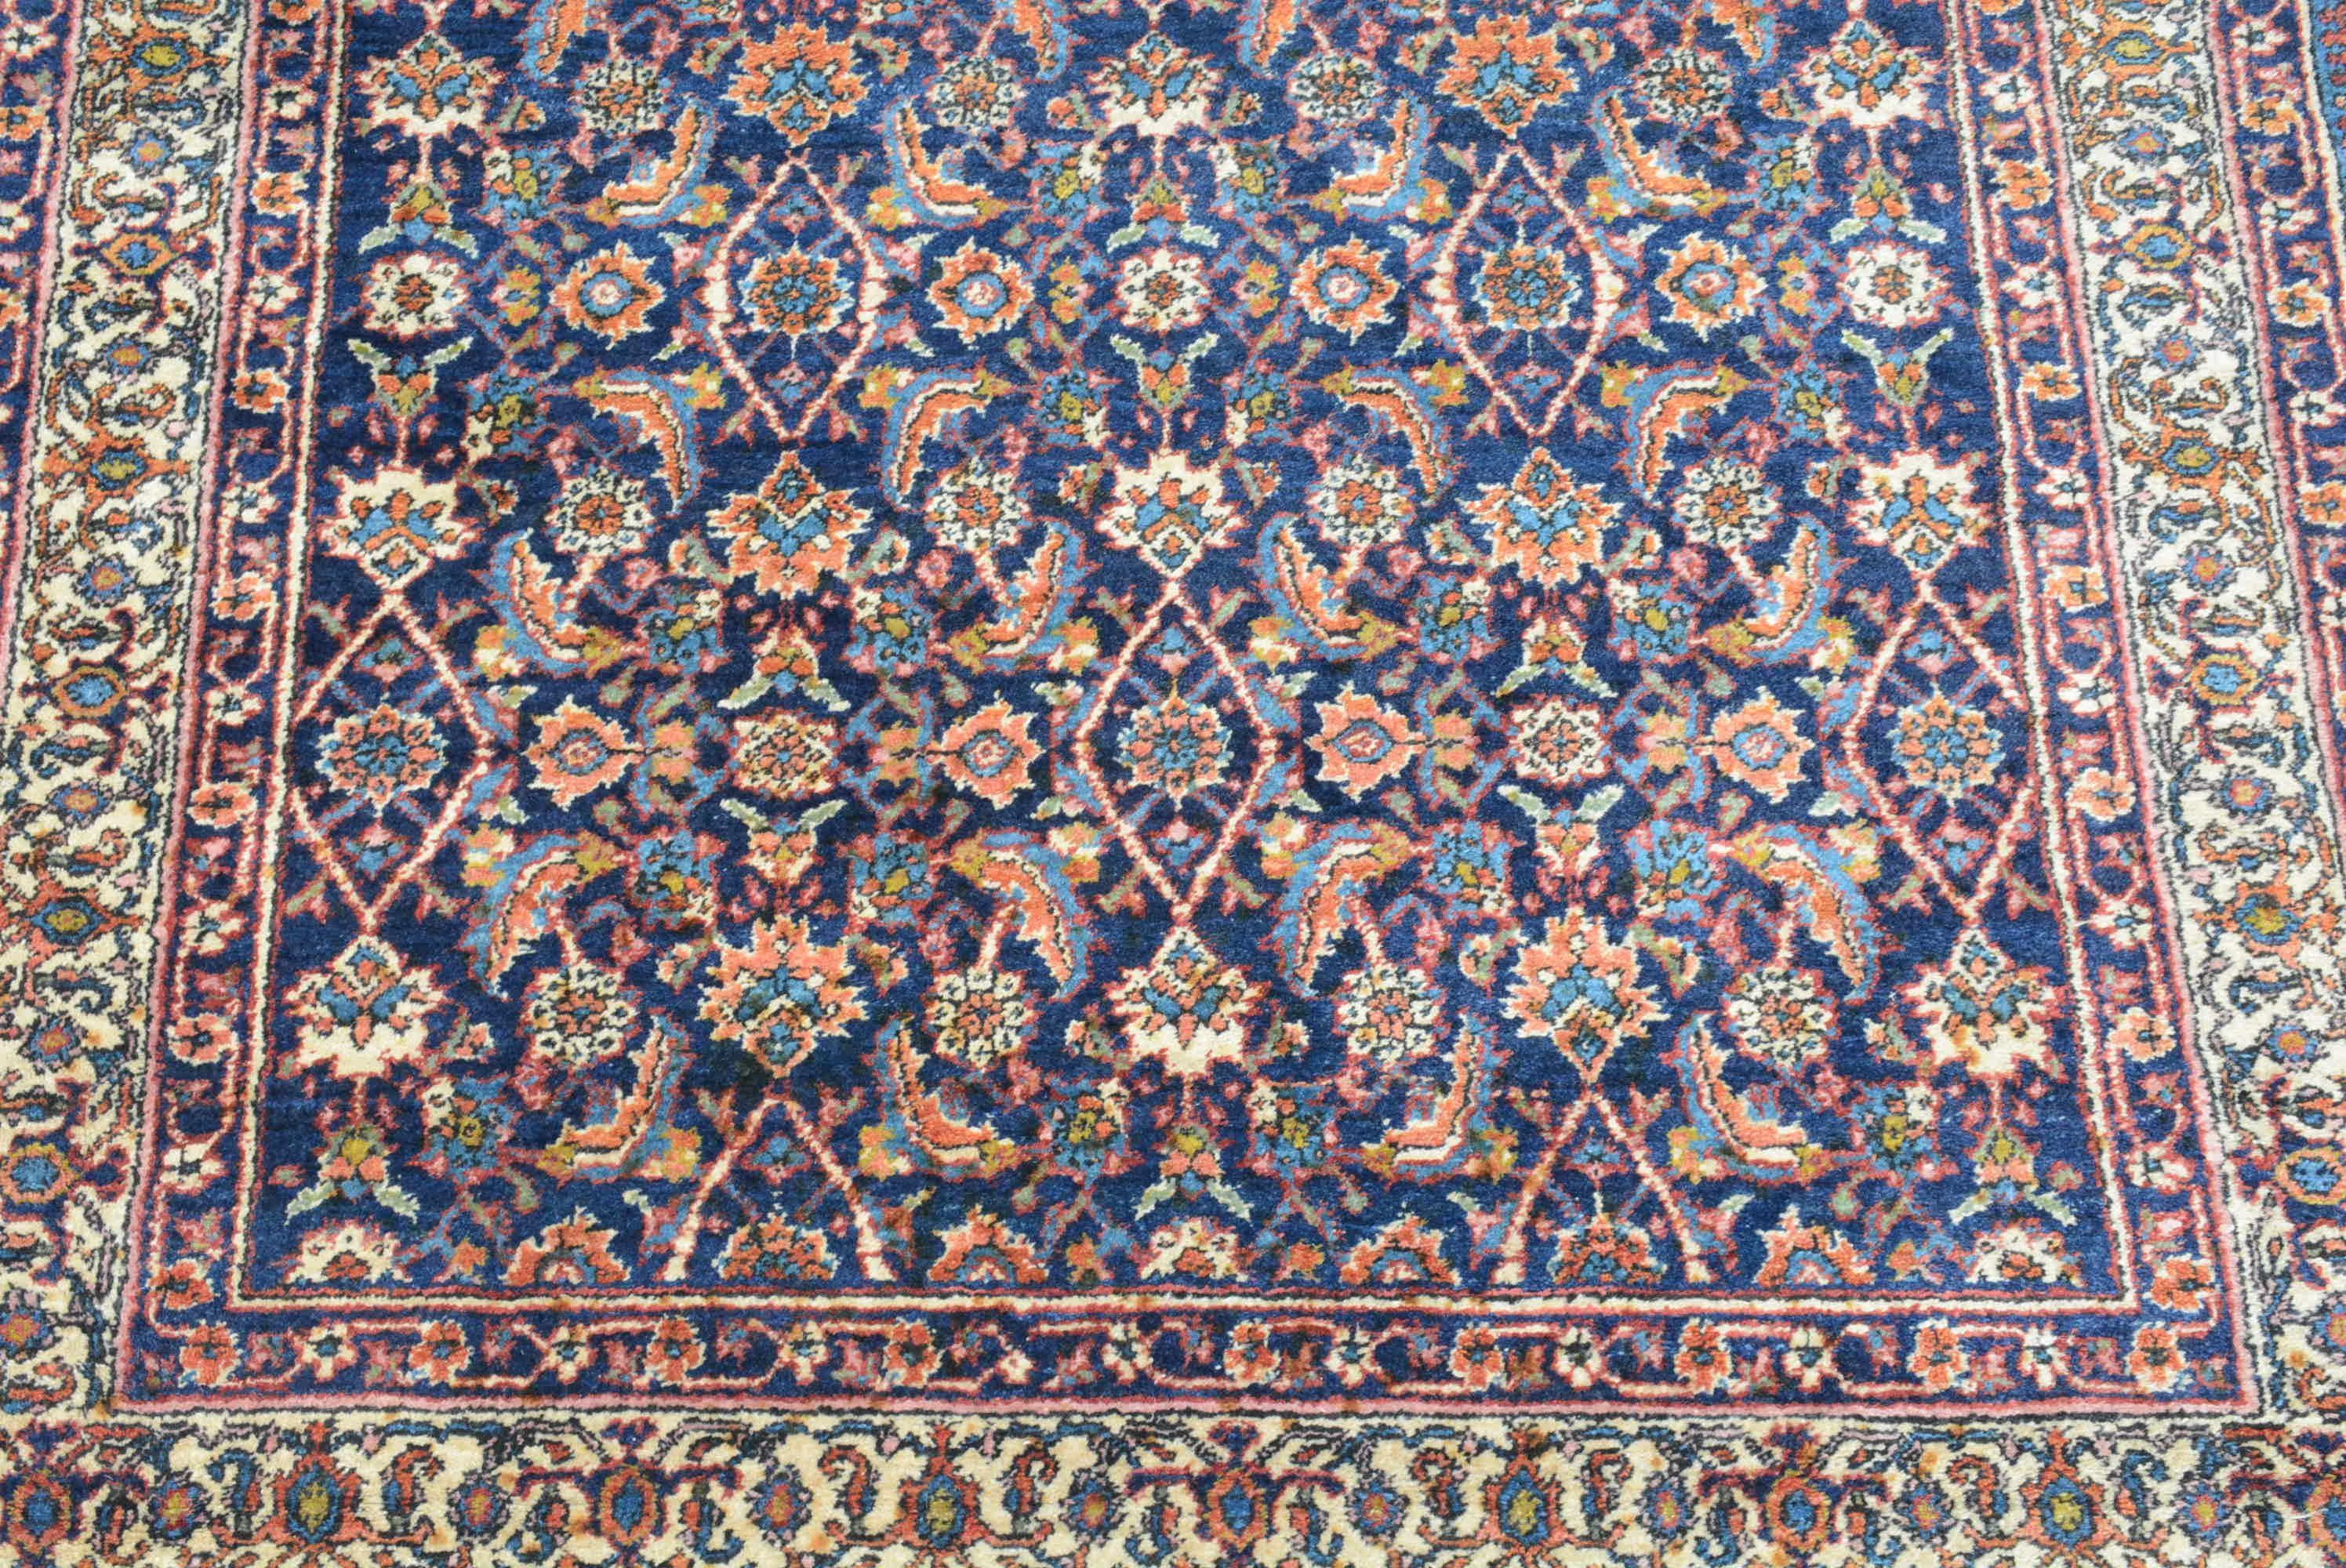 The town of Sivas in central Turkey is the easternmost carpet producing town in that country.  The rugs woven here usually have patterns that are based on those found in traditional Persian rugs and carpets.  These rugs are woven with symmetrical